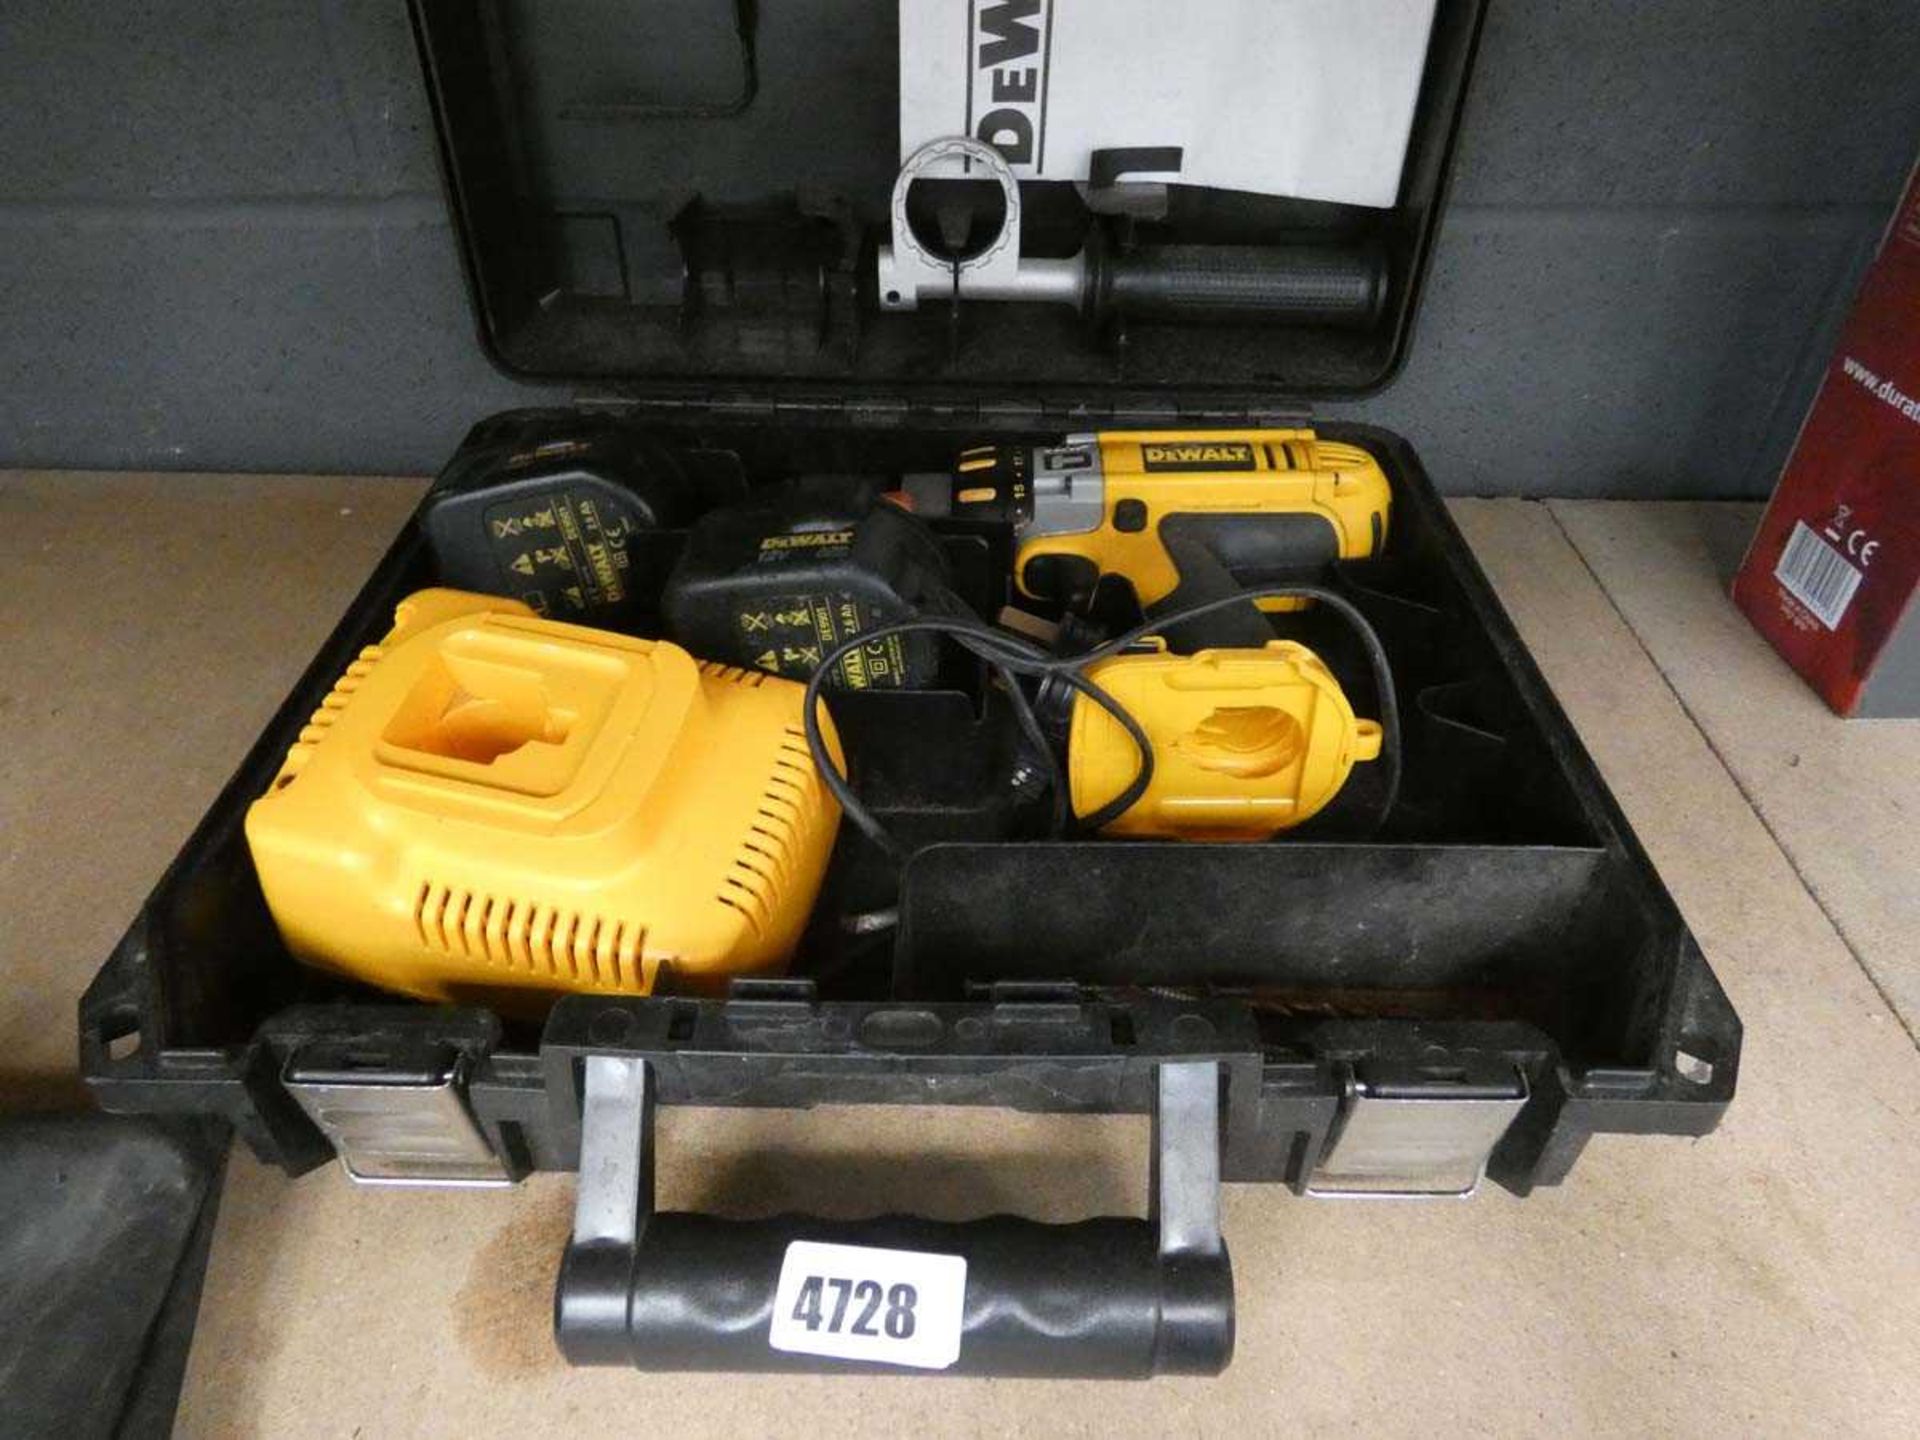 DeWalt 12v battery drill with 2 batteries and charger